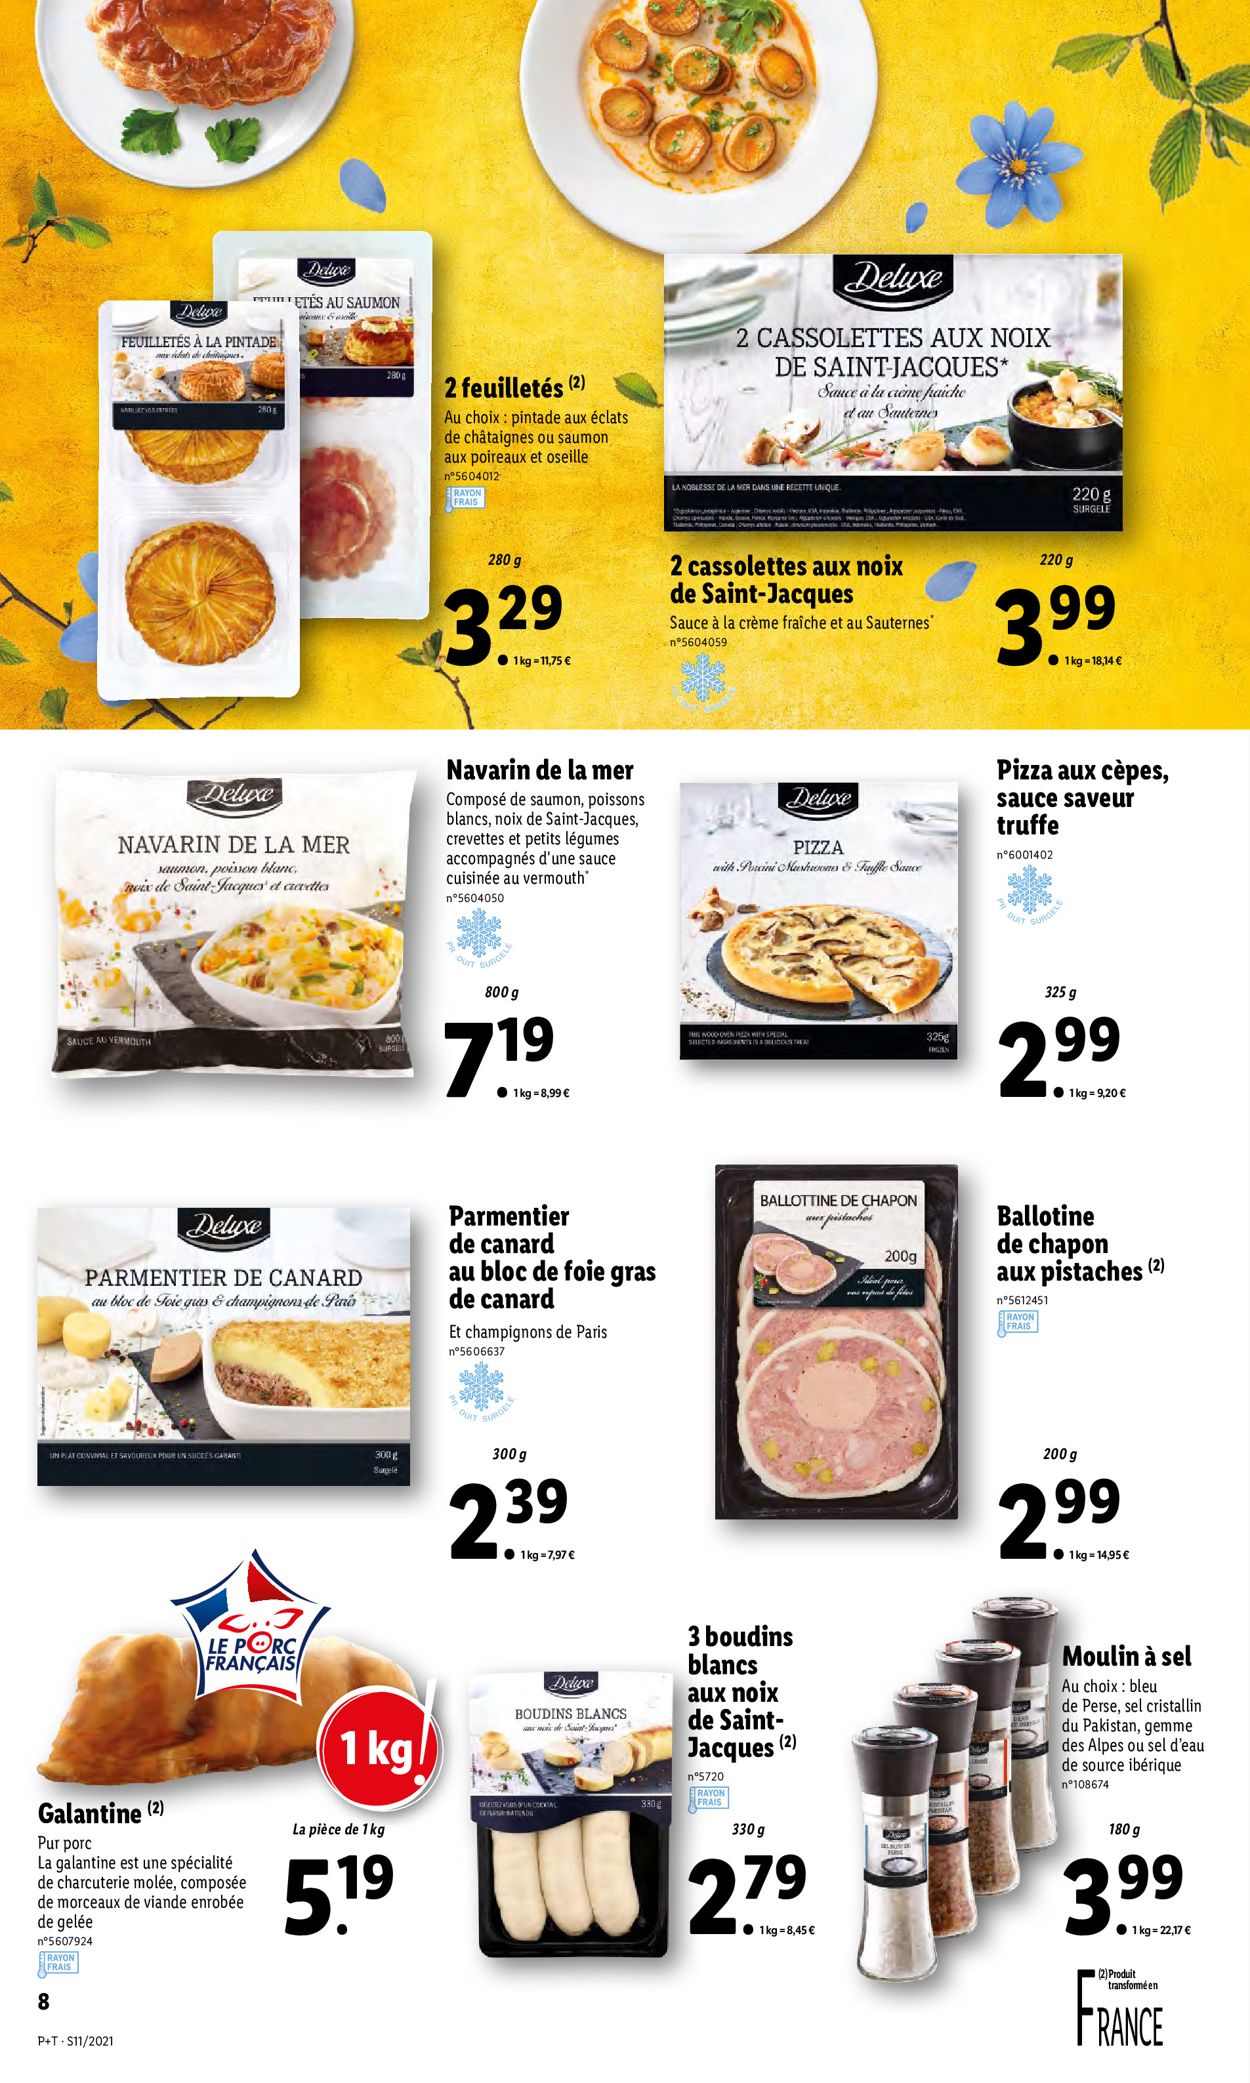 Lidl Catalogue - 17.03-23.03.2021 (Page 8)